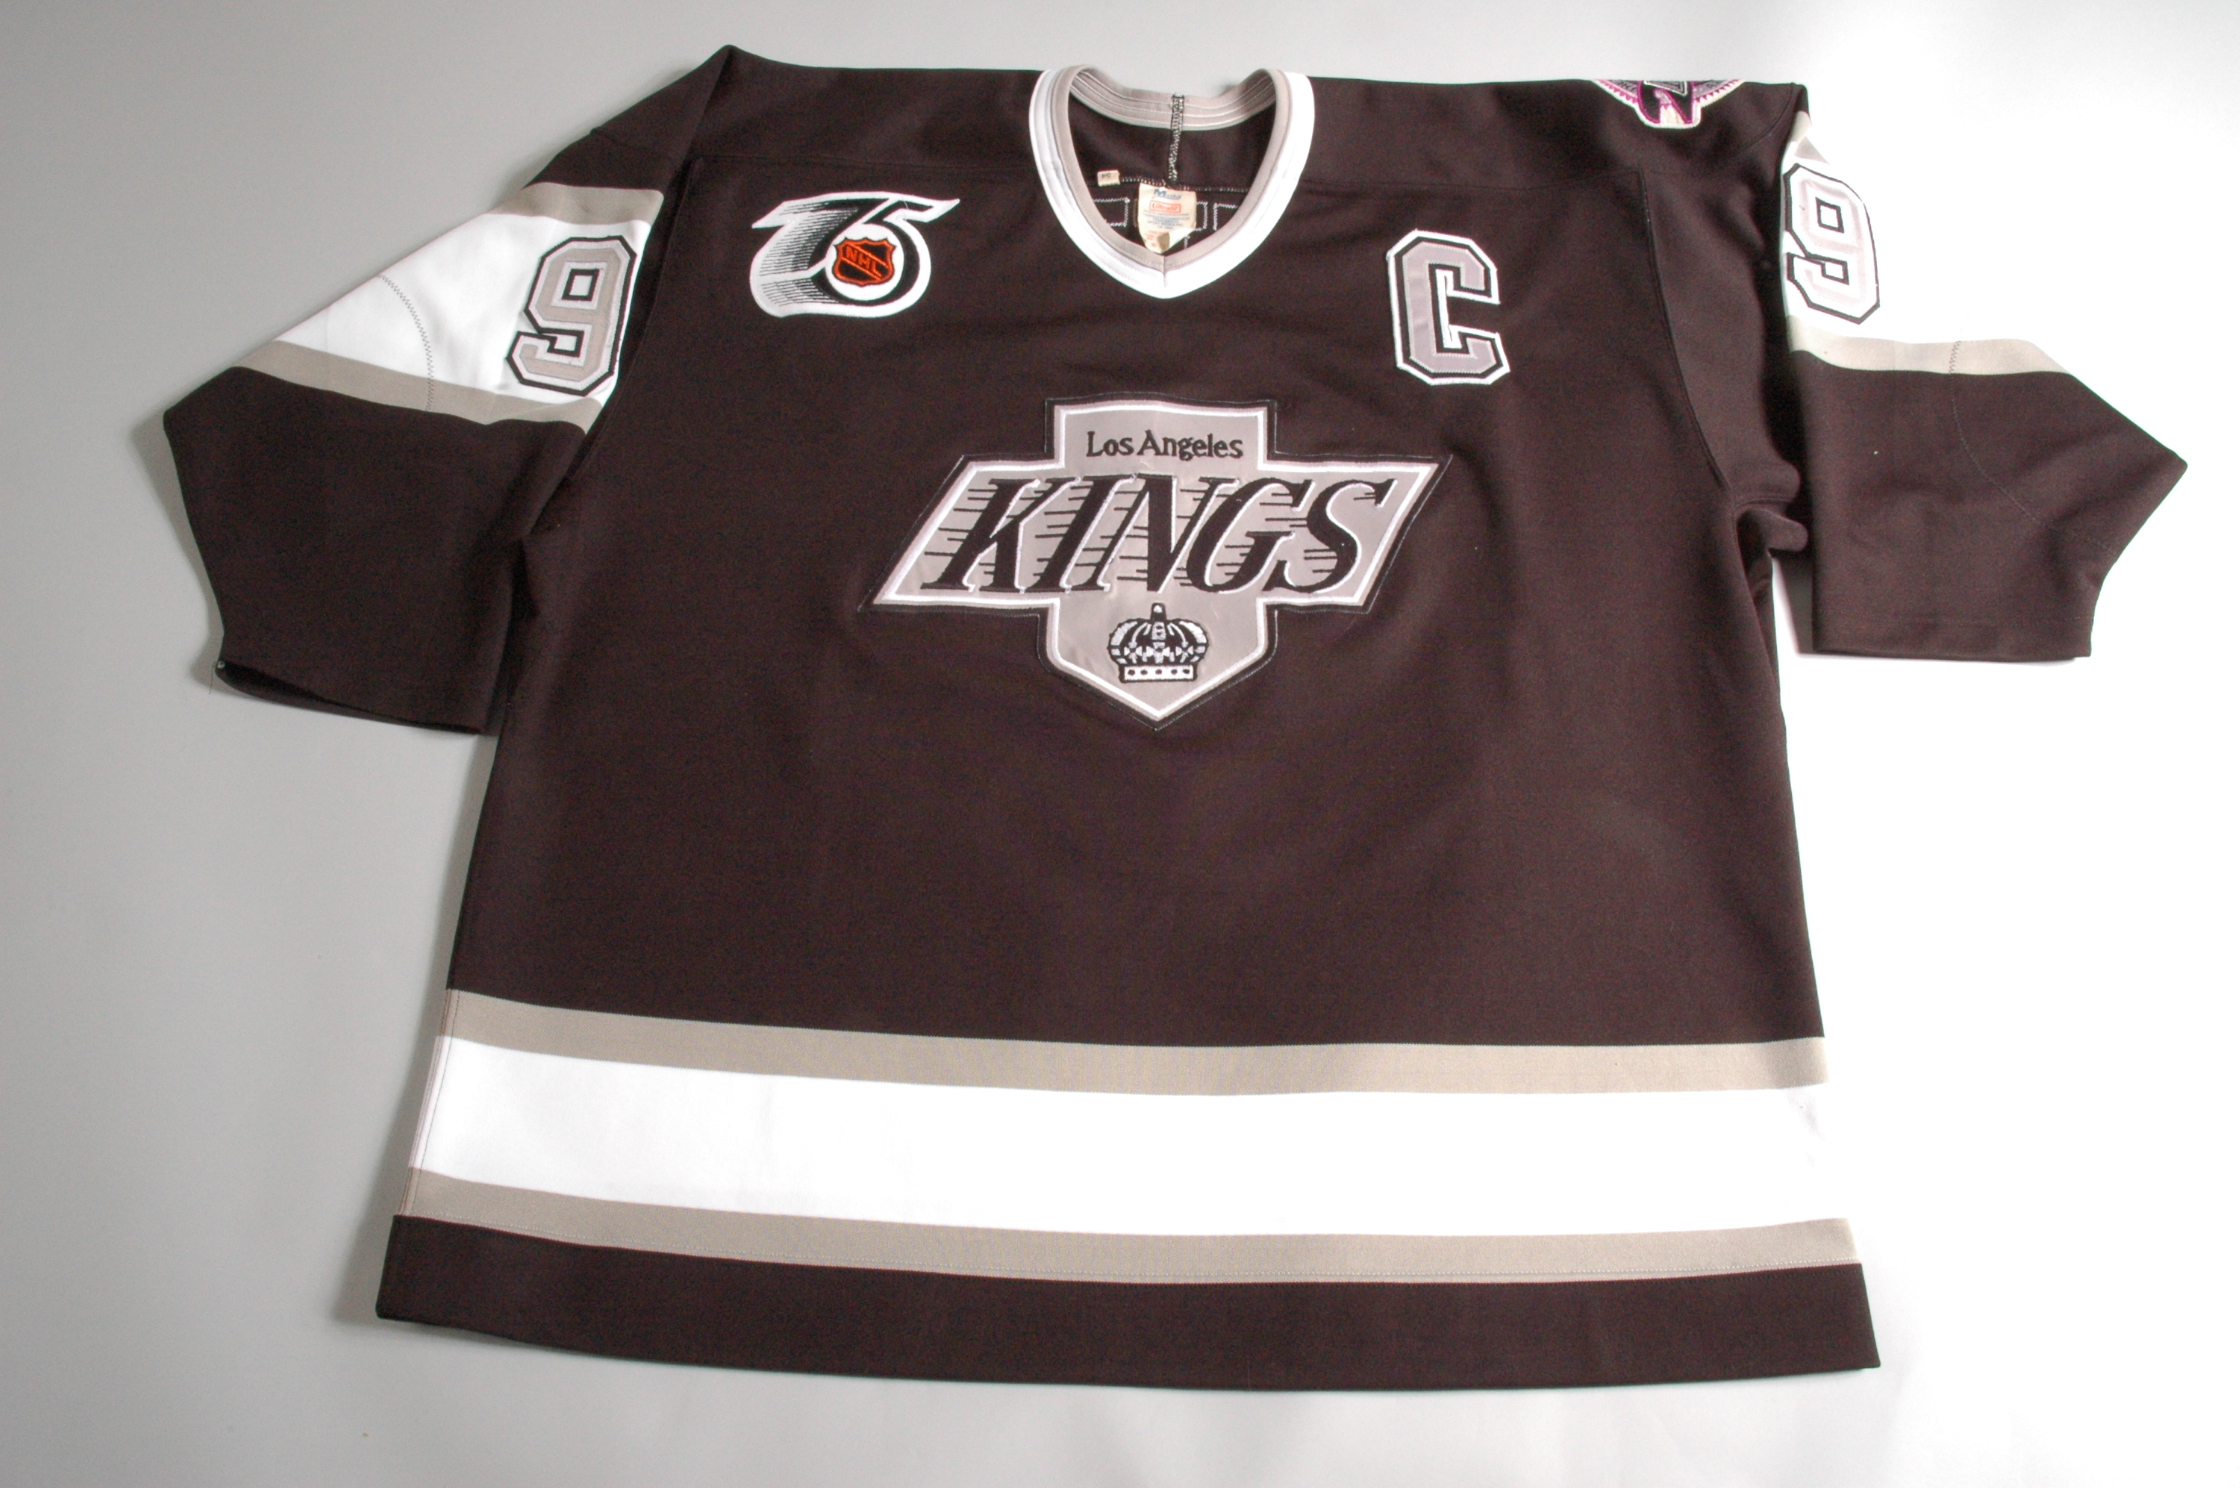 Wayne Gretzky Los Angeles Kings 1991 1992 Game Used Jersey - Game Used Only